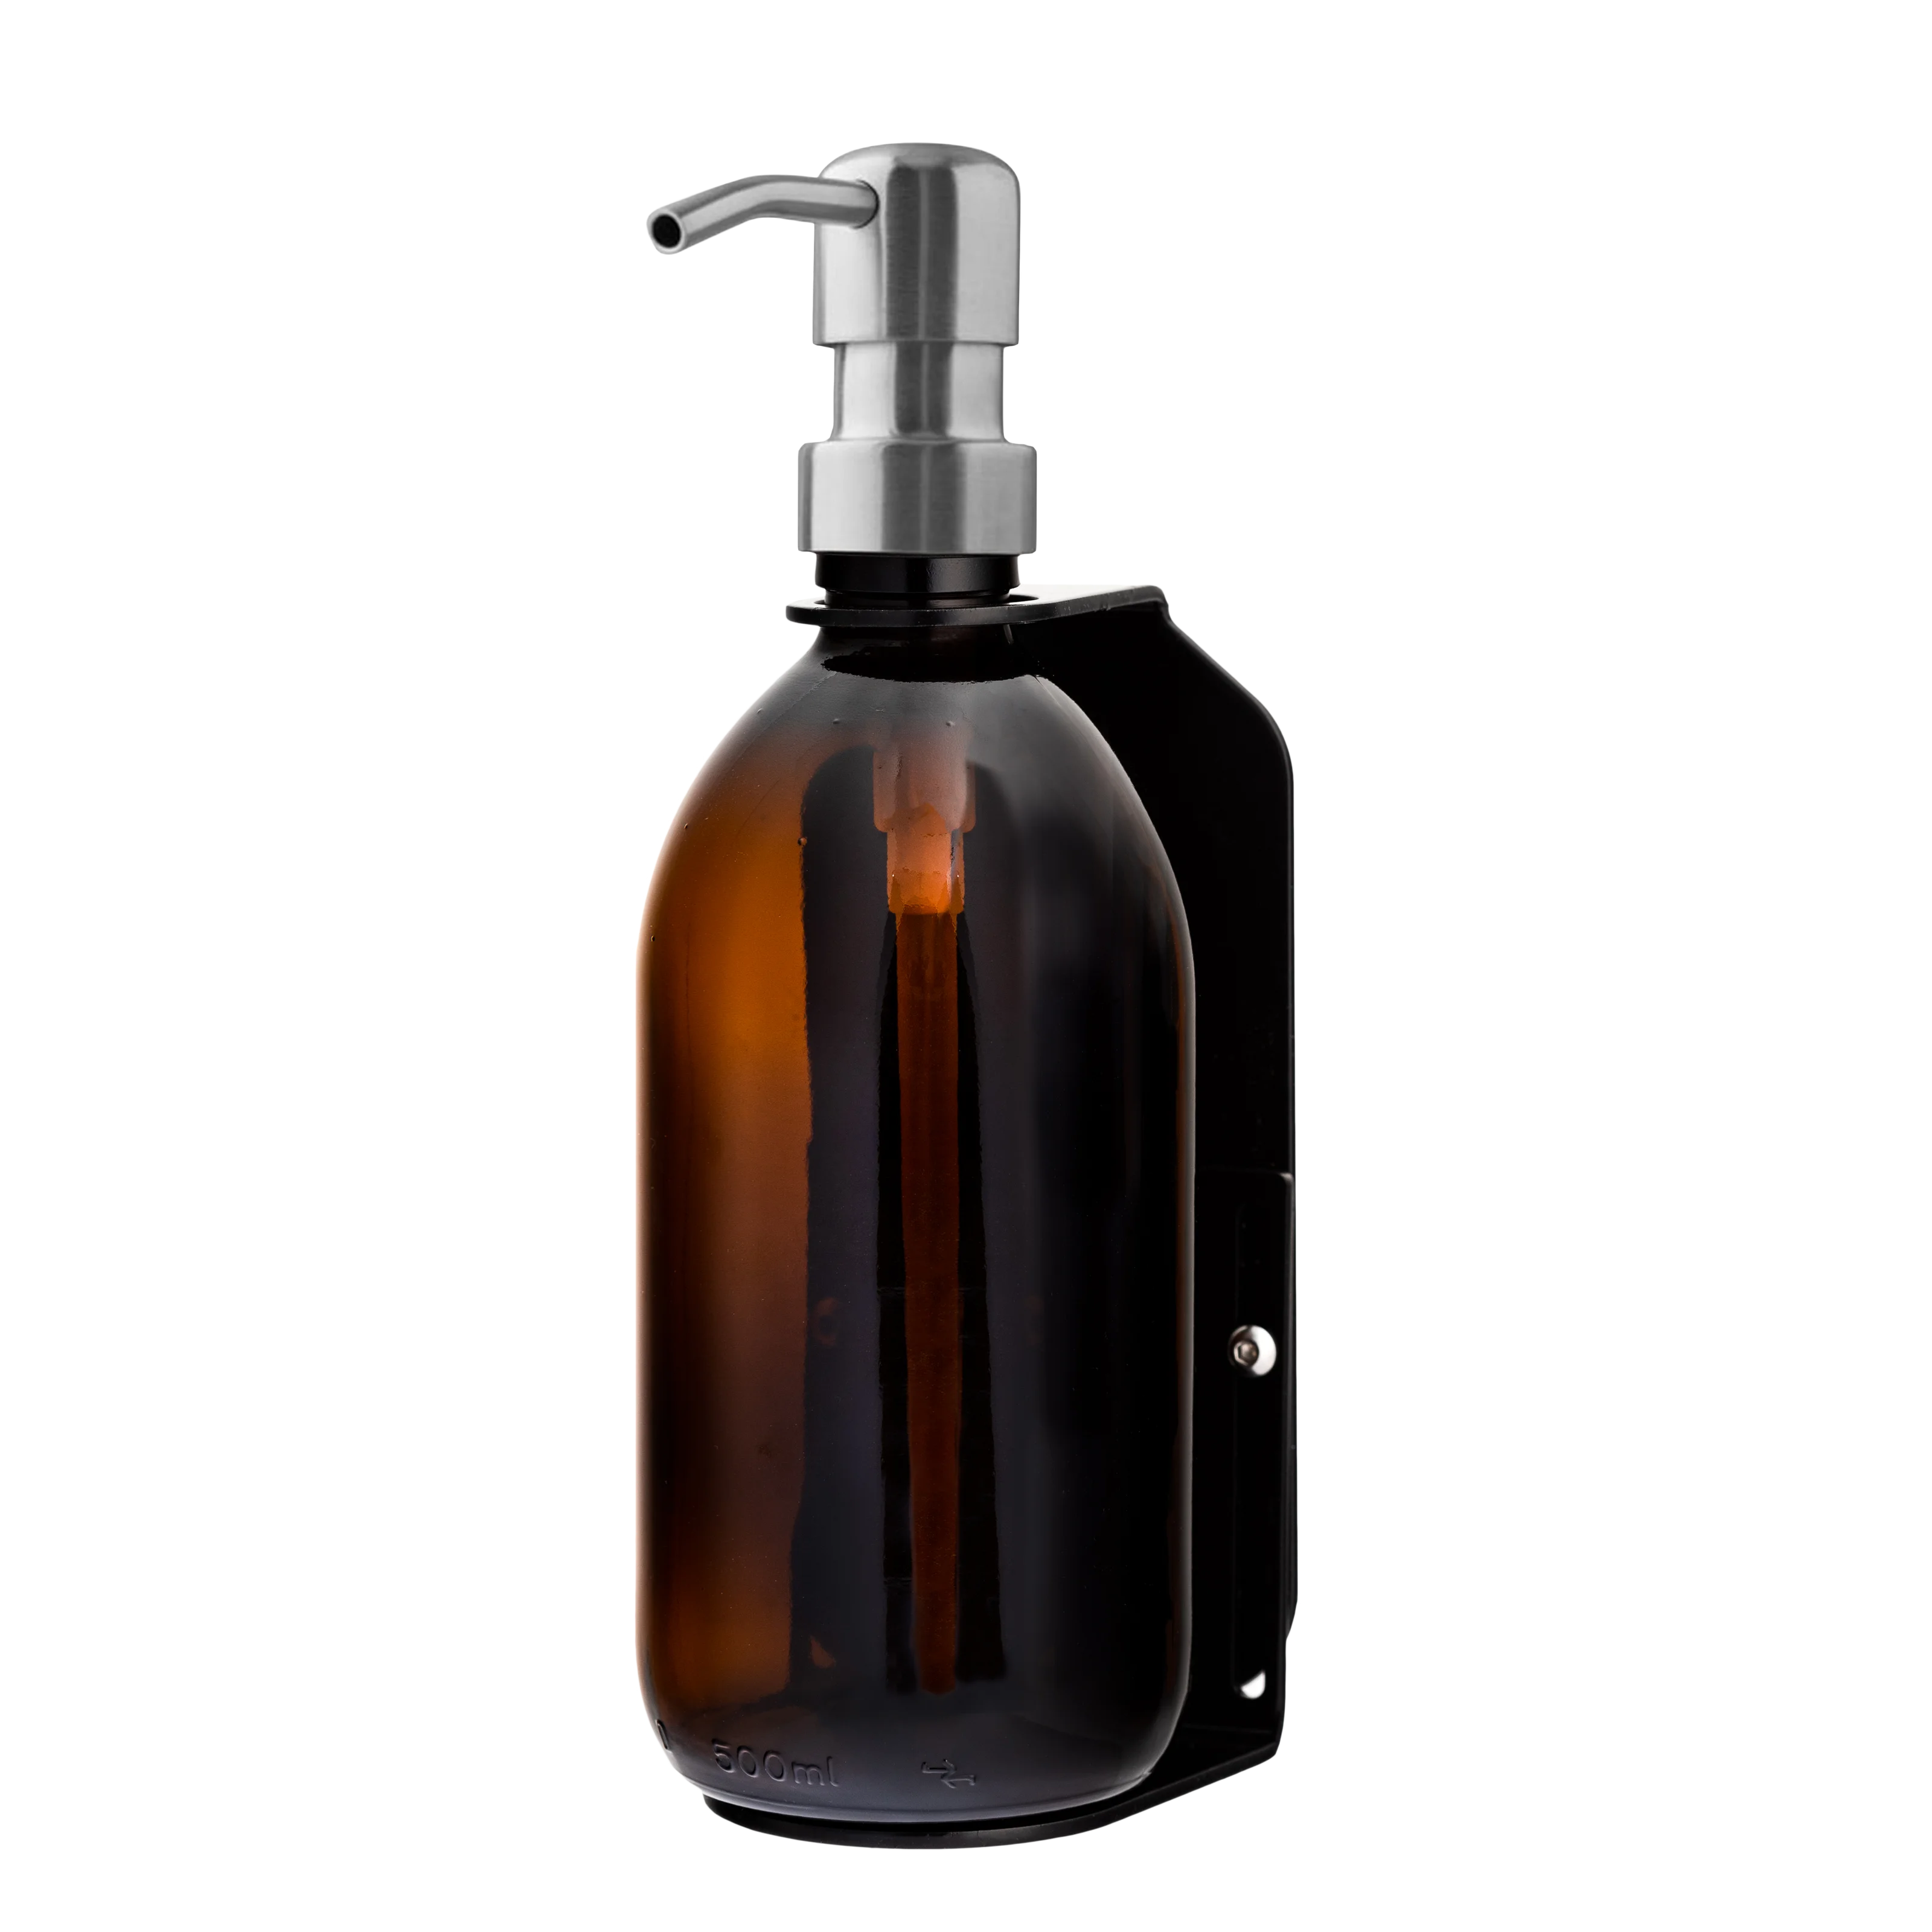 Black Single Wall Mounted Soap Dispenser with 250ml amber dispenser and silver pump